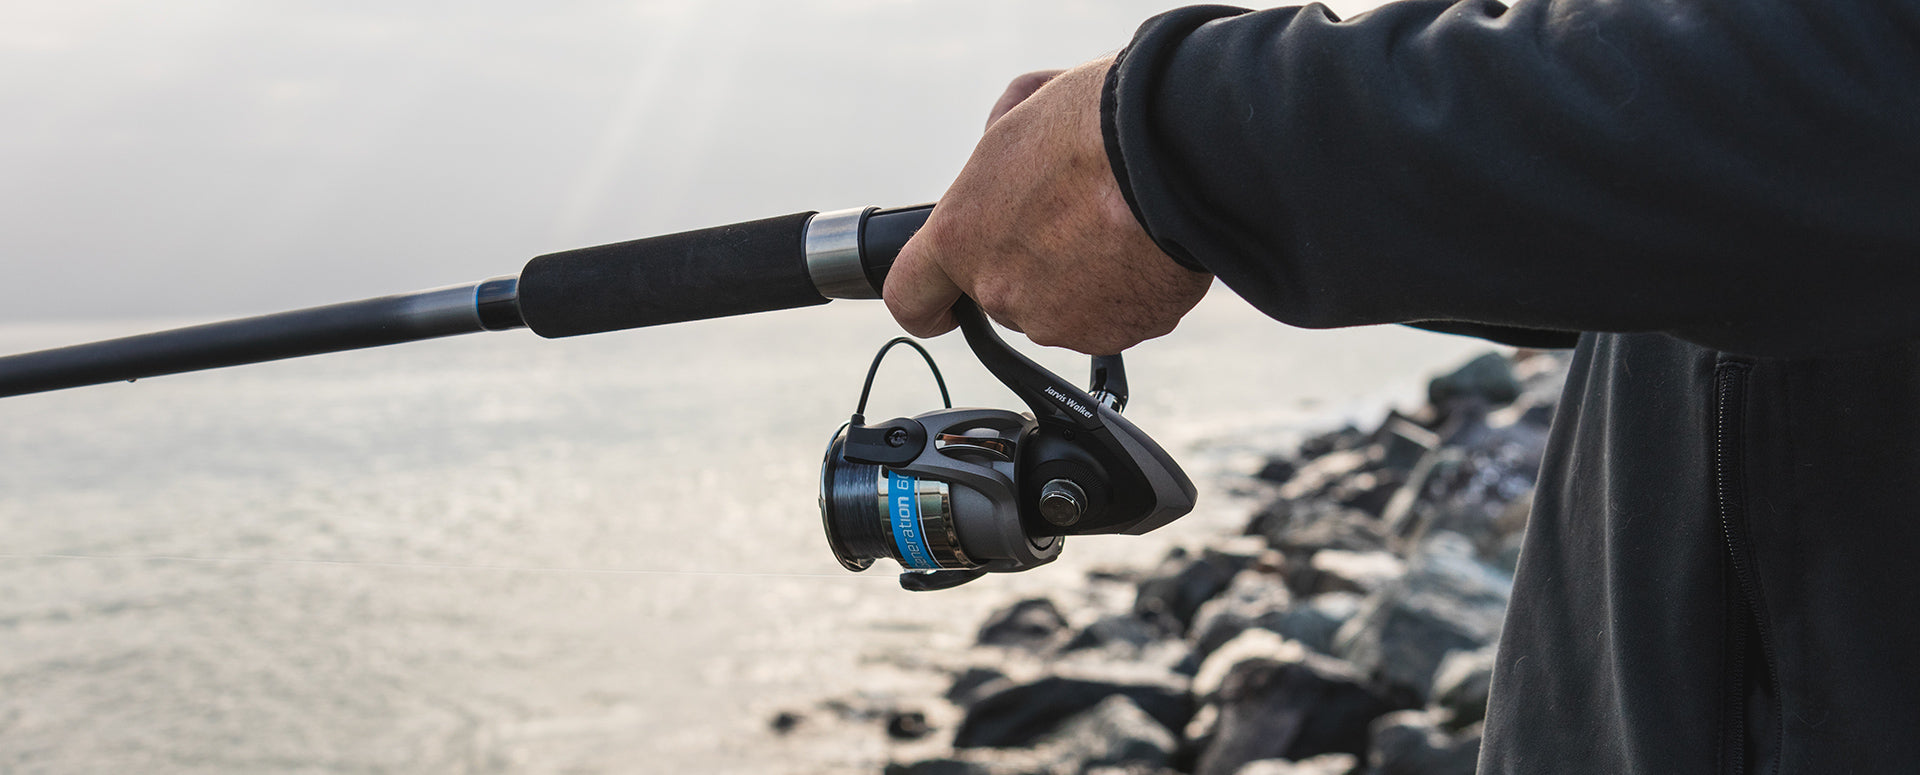 Shop Fishing Rod and Reel Combos in NZ